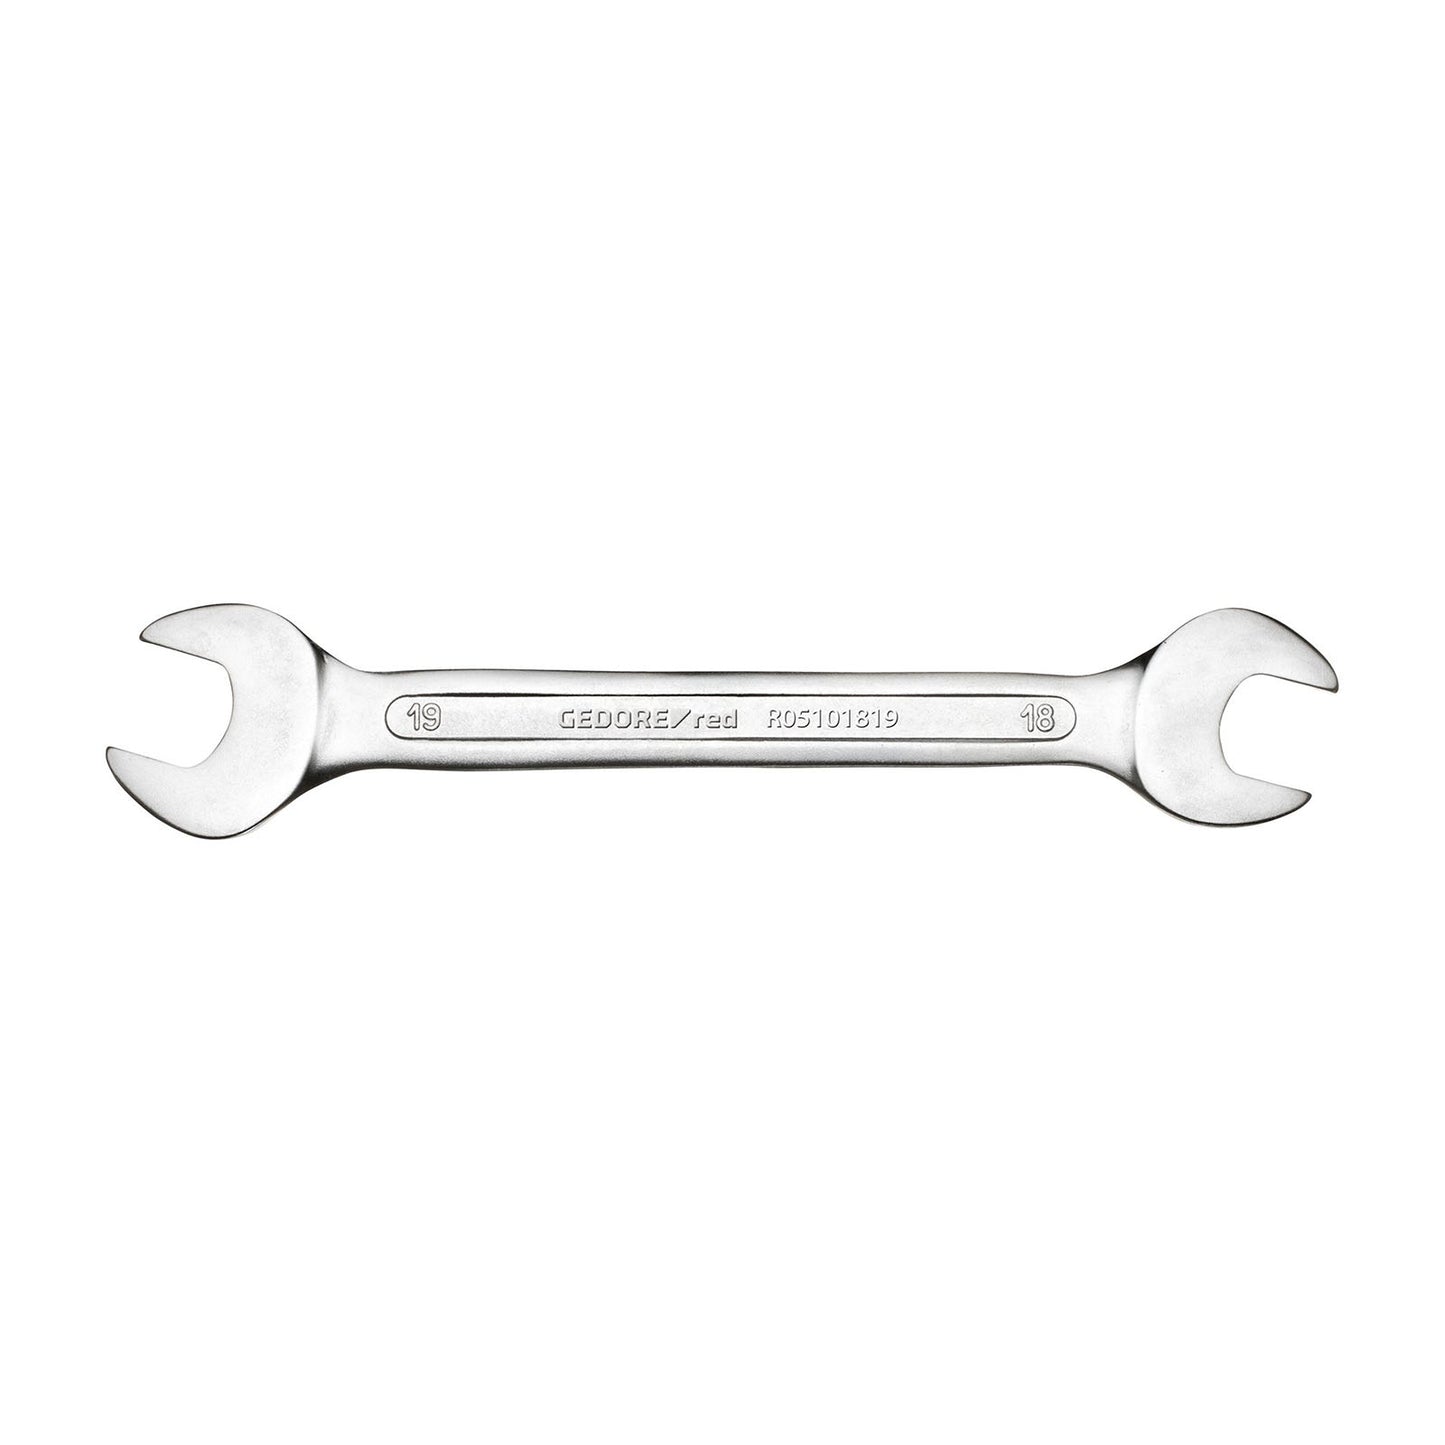 GEDORE red R05102732 - Double open end wrench 27x32 mm L=302 mm (3300954)